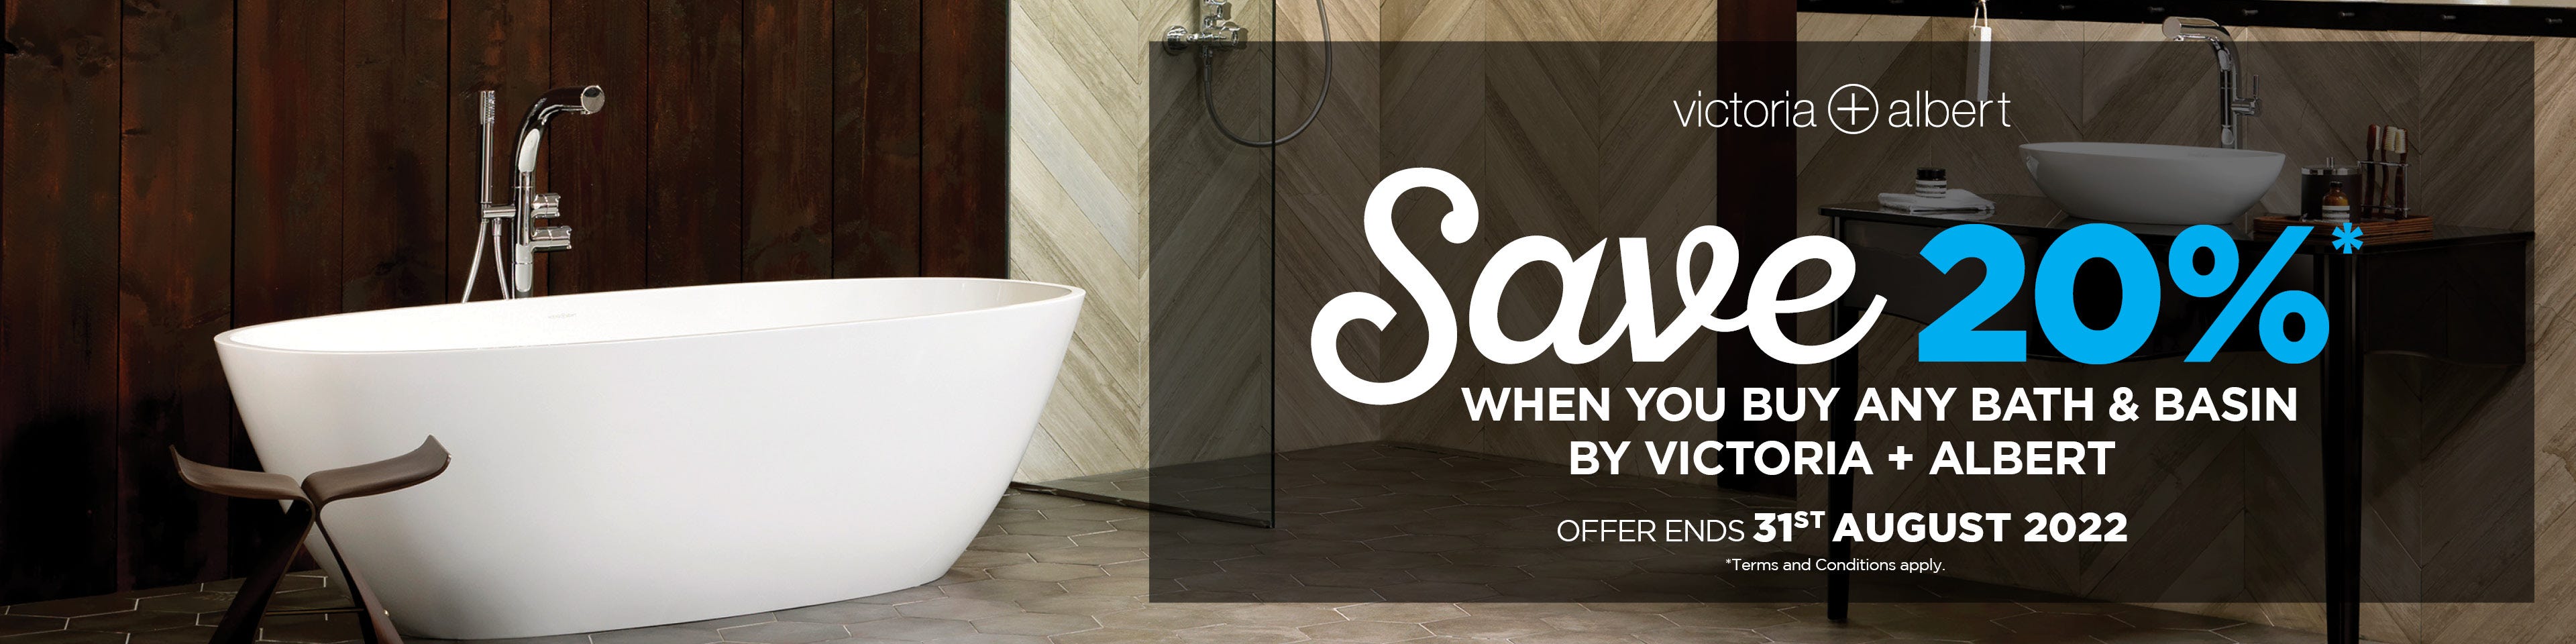 Save 20%* when you buy any Victoria + Albert bath & basin together at e&s. Offer ends 31/08/22. Find out more at an e&s near you today.